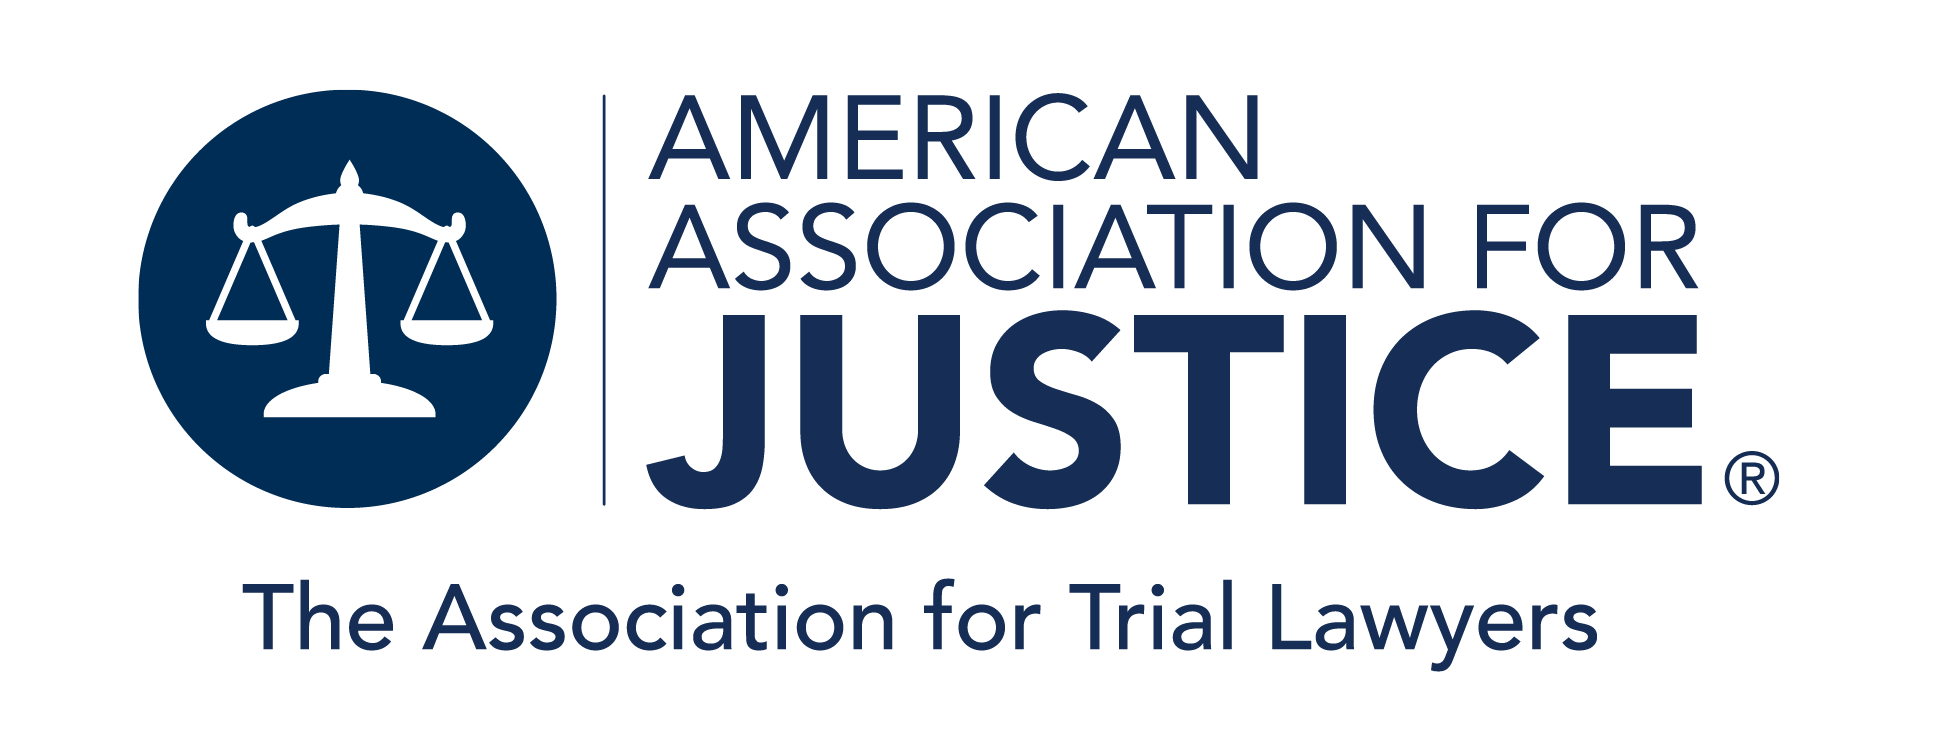 American Association for Justice (formerly) Association of Trial Lawyers of America, Washington D.C.